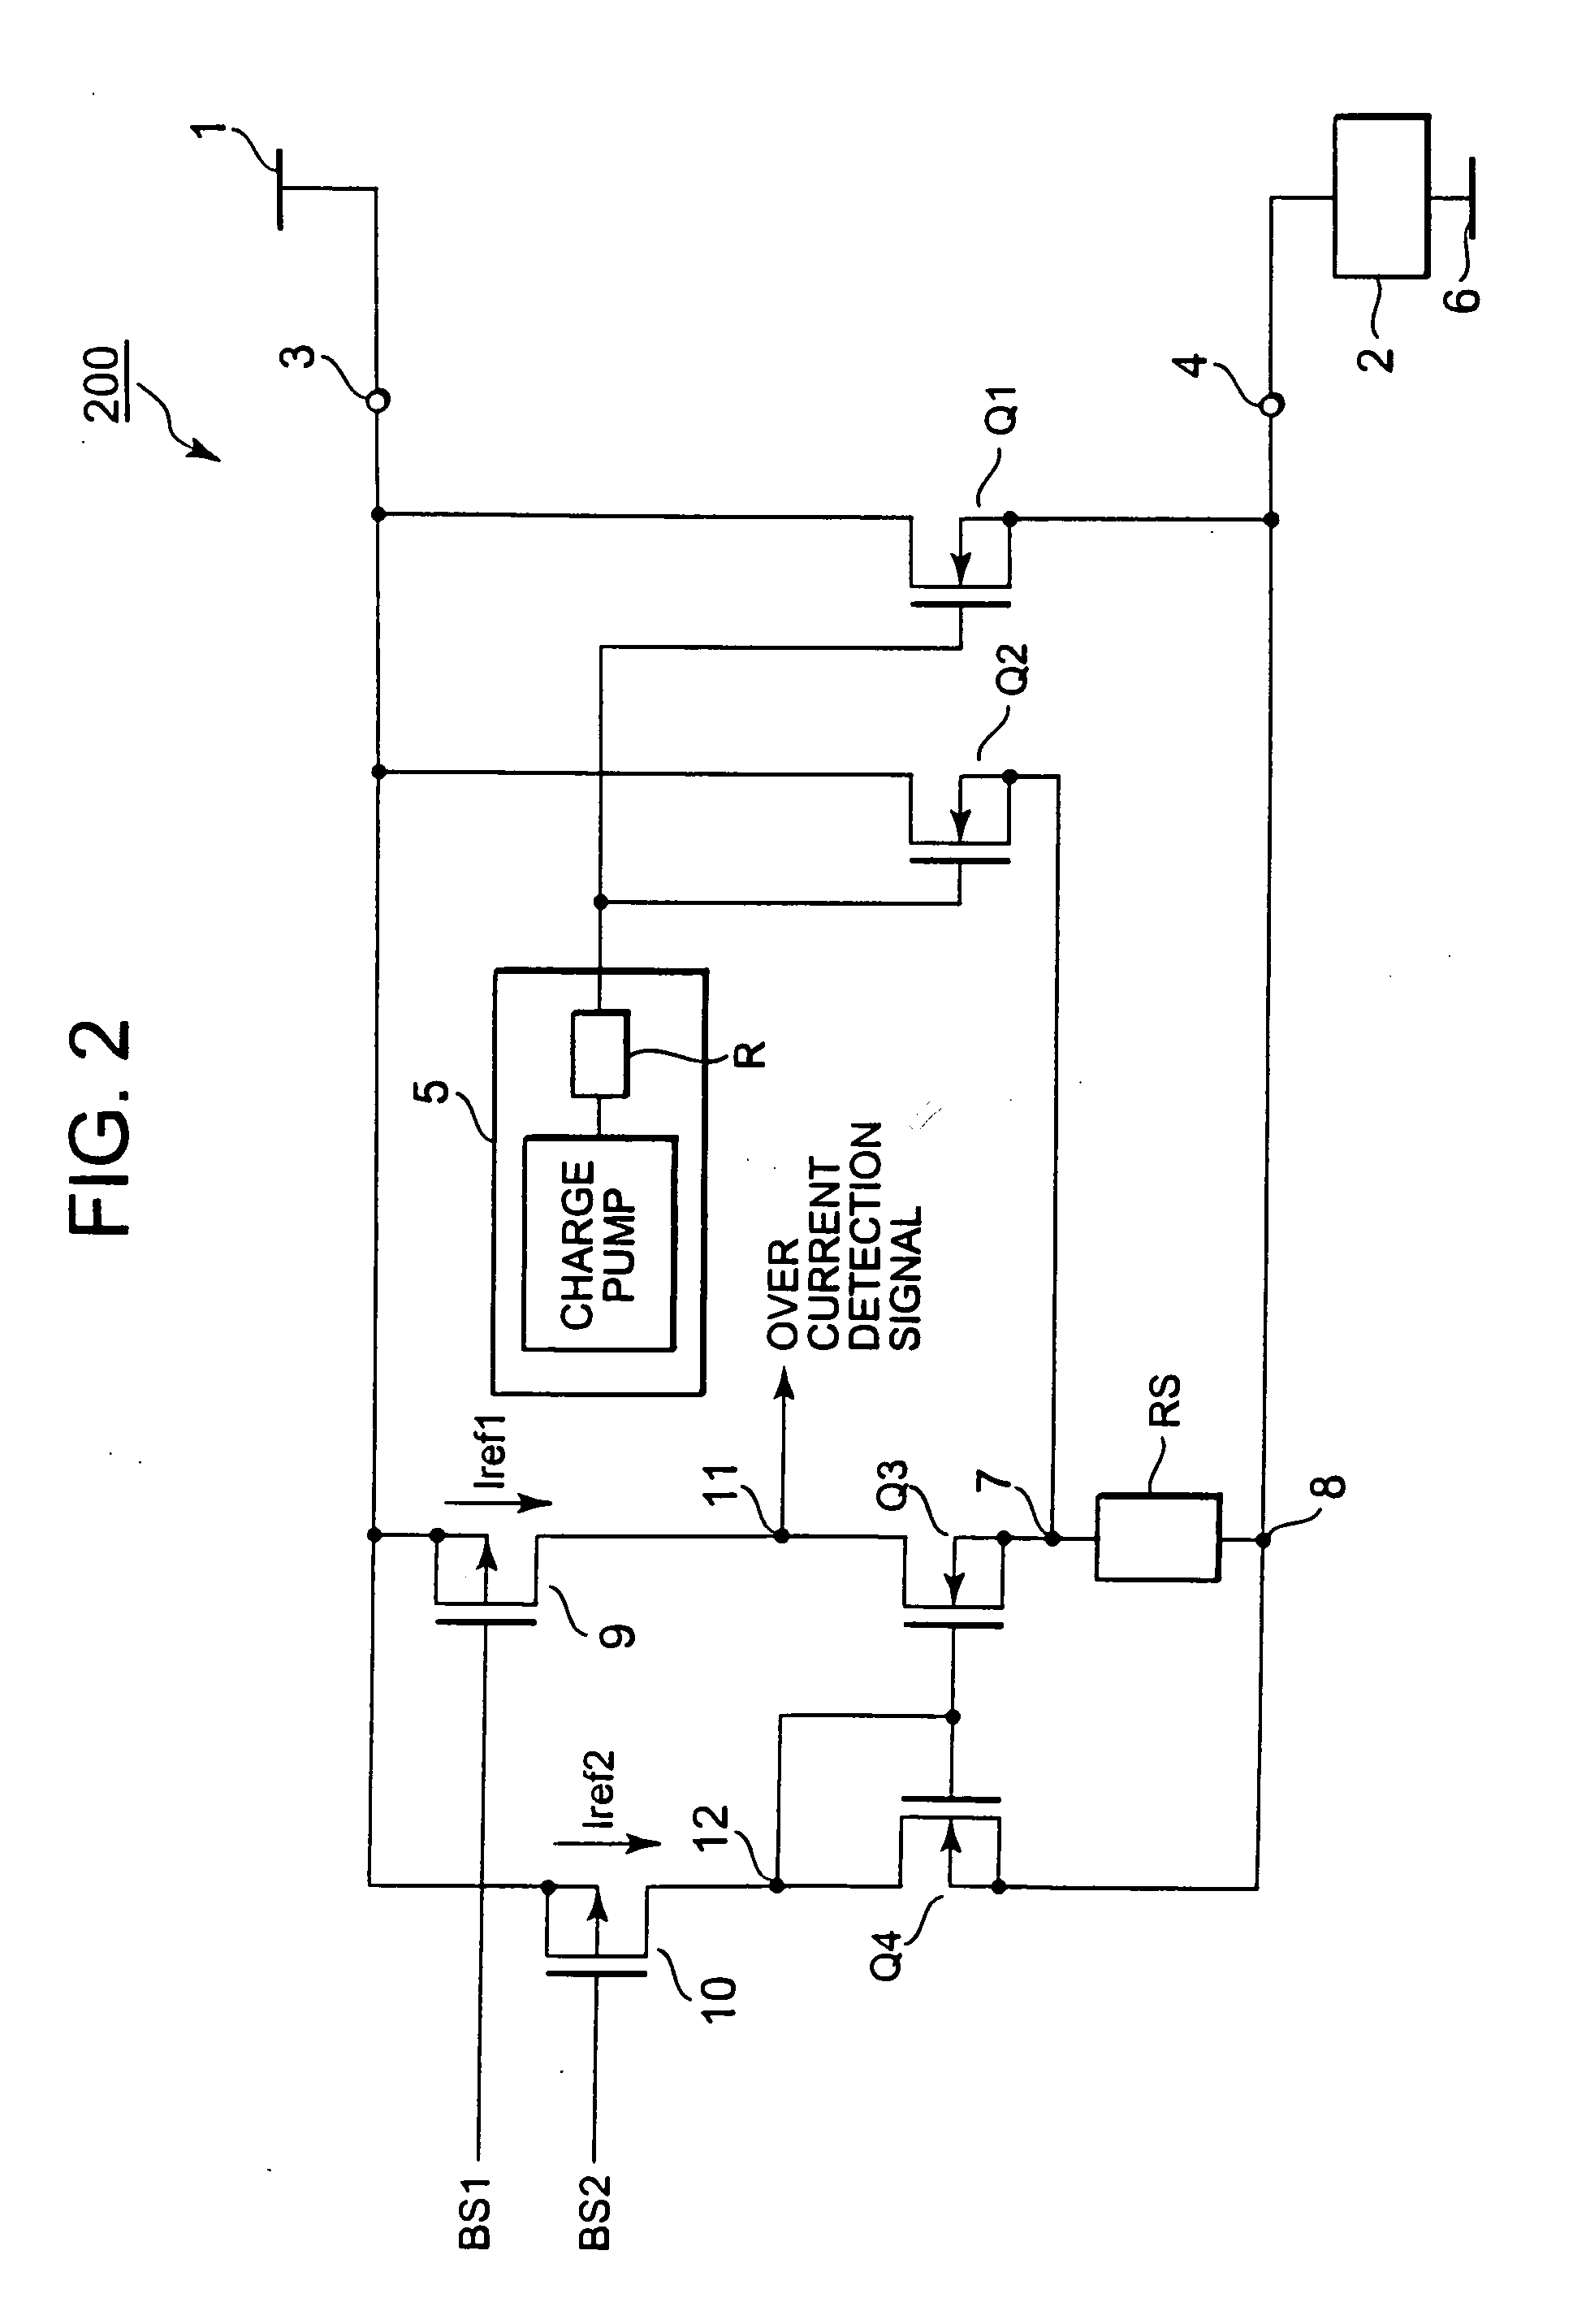 Power supply control apparatus including overcurrent detection circuit